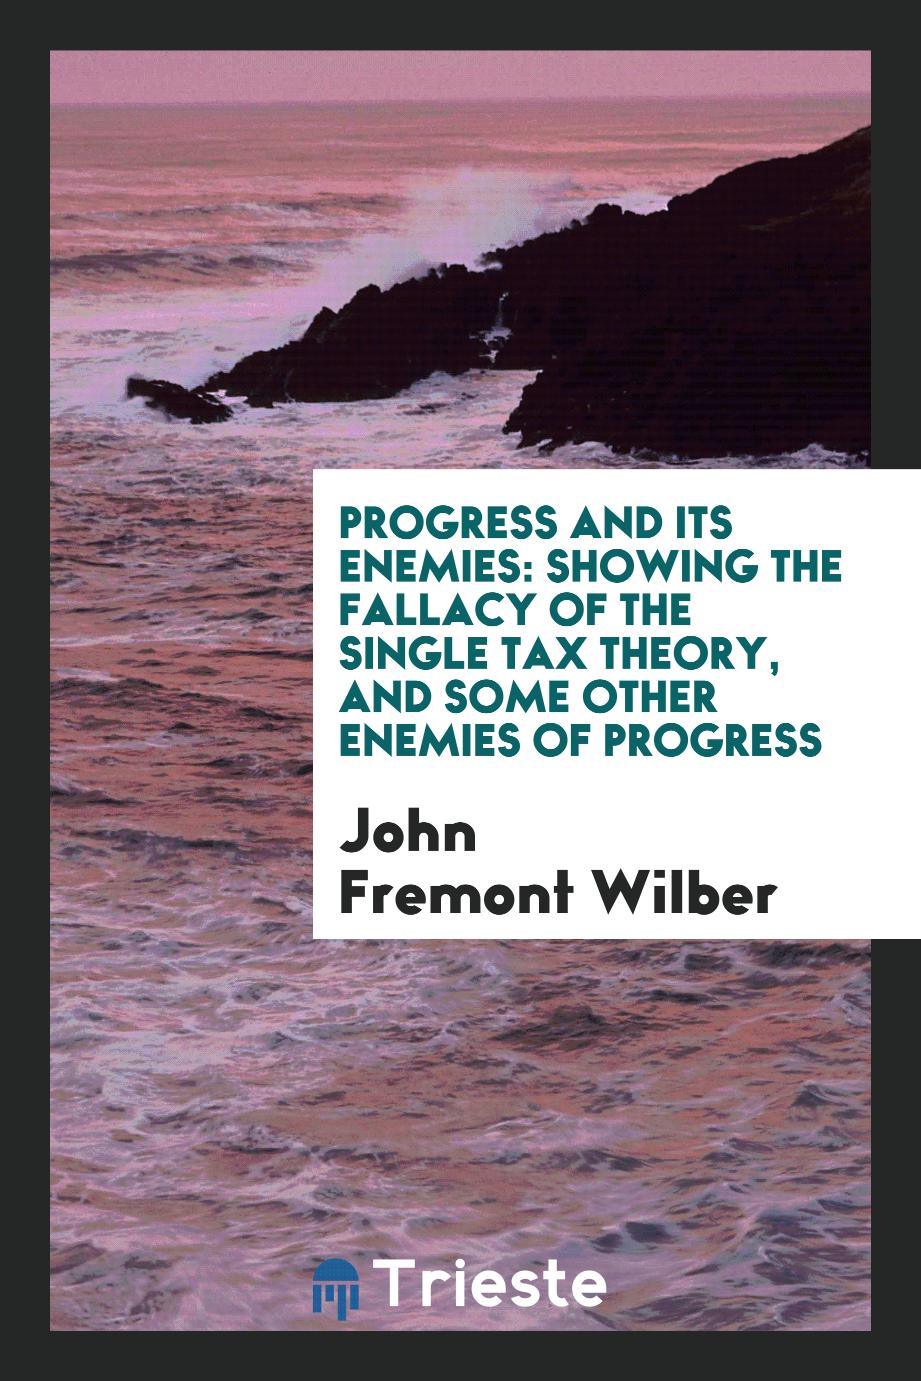 Progress and Its Enemies: Showing the Fallacy of the Single Tax Theory, and Some Other Enemies of Progress